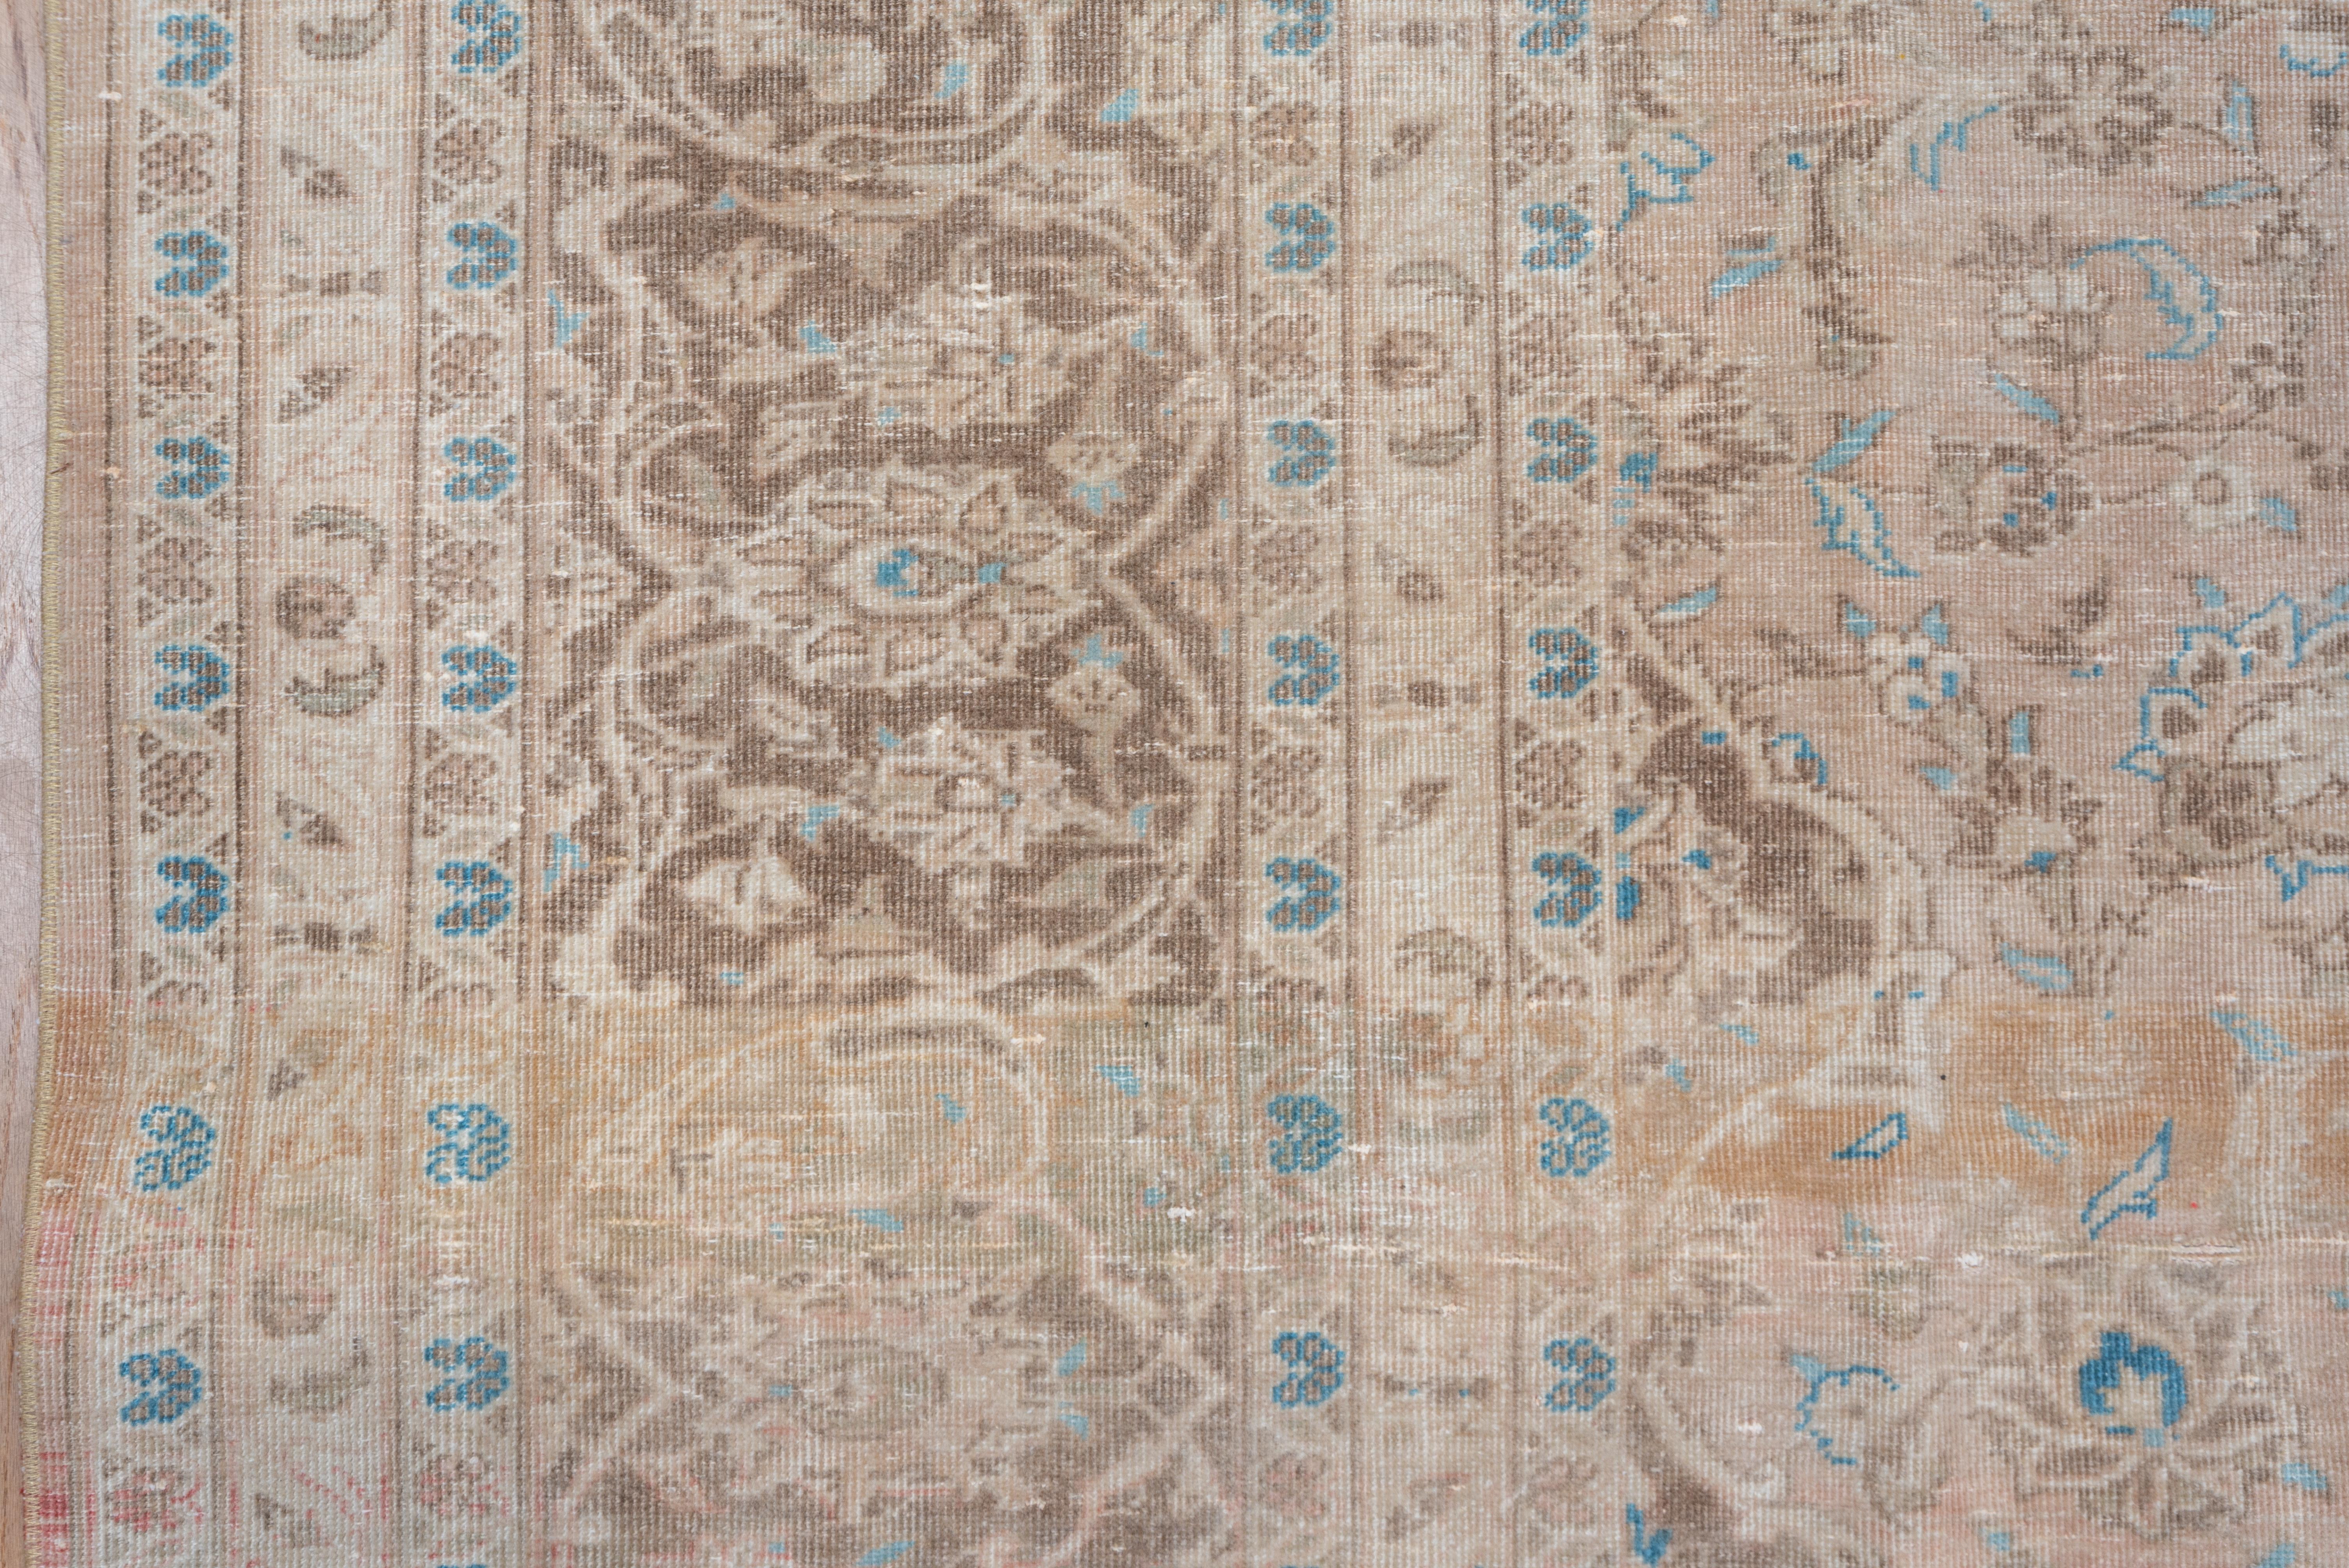 This Tabriz-style eastern Turkish medallion carpet shows a layered red-brown, cream and mid-blue medallion on an abrashed buff-tan palmettte decorated field, within an abrashed palmette, double vine and split arabesque design border.